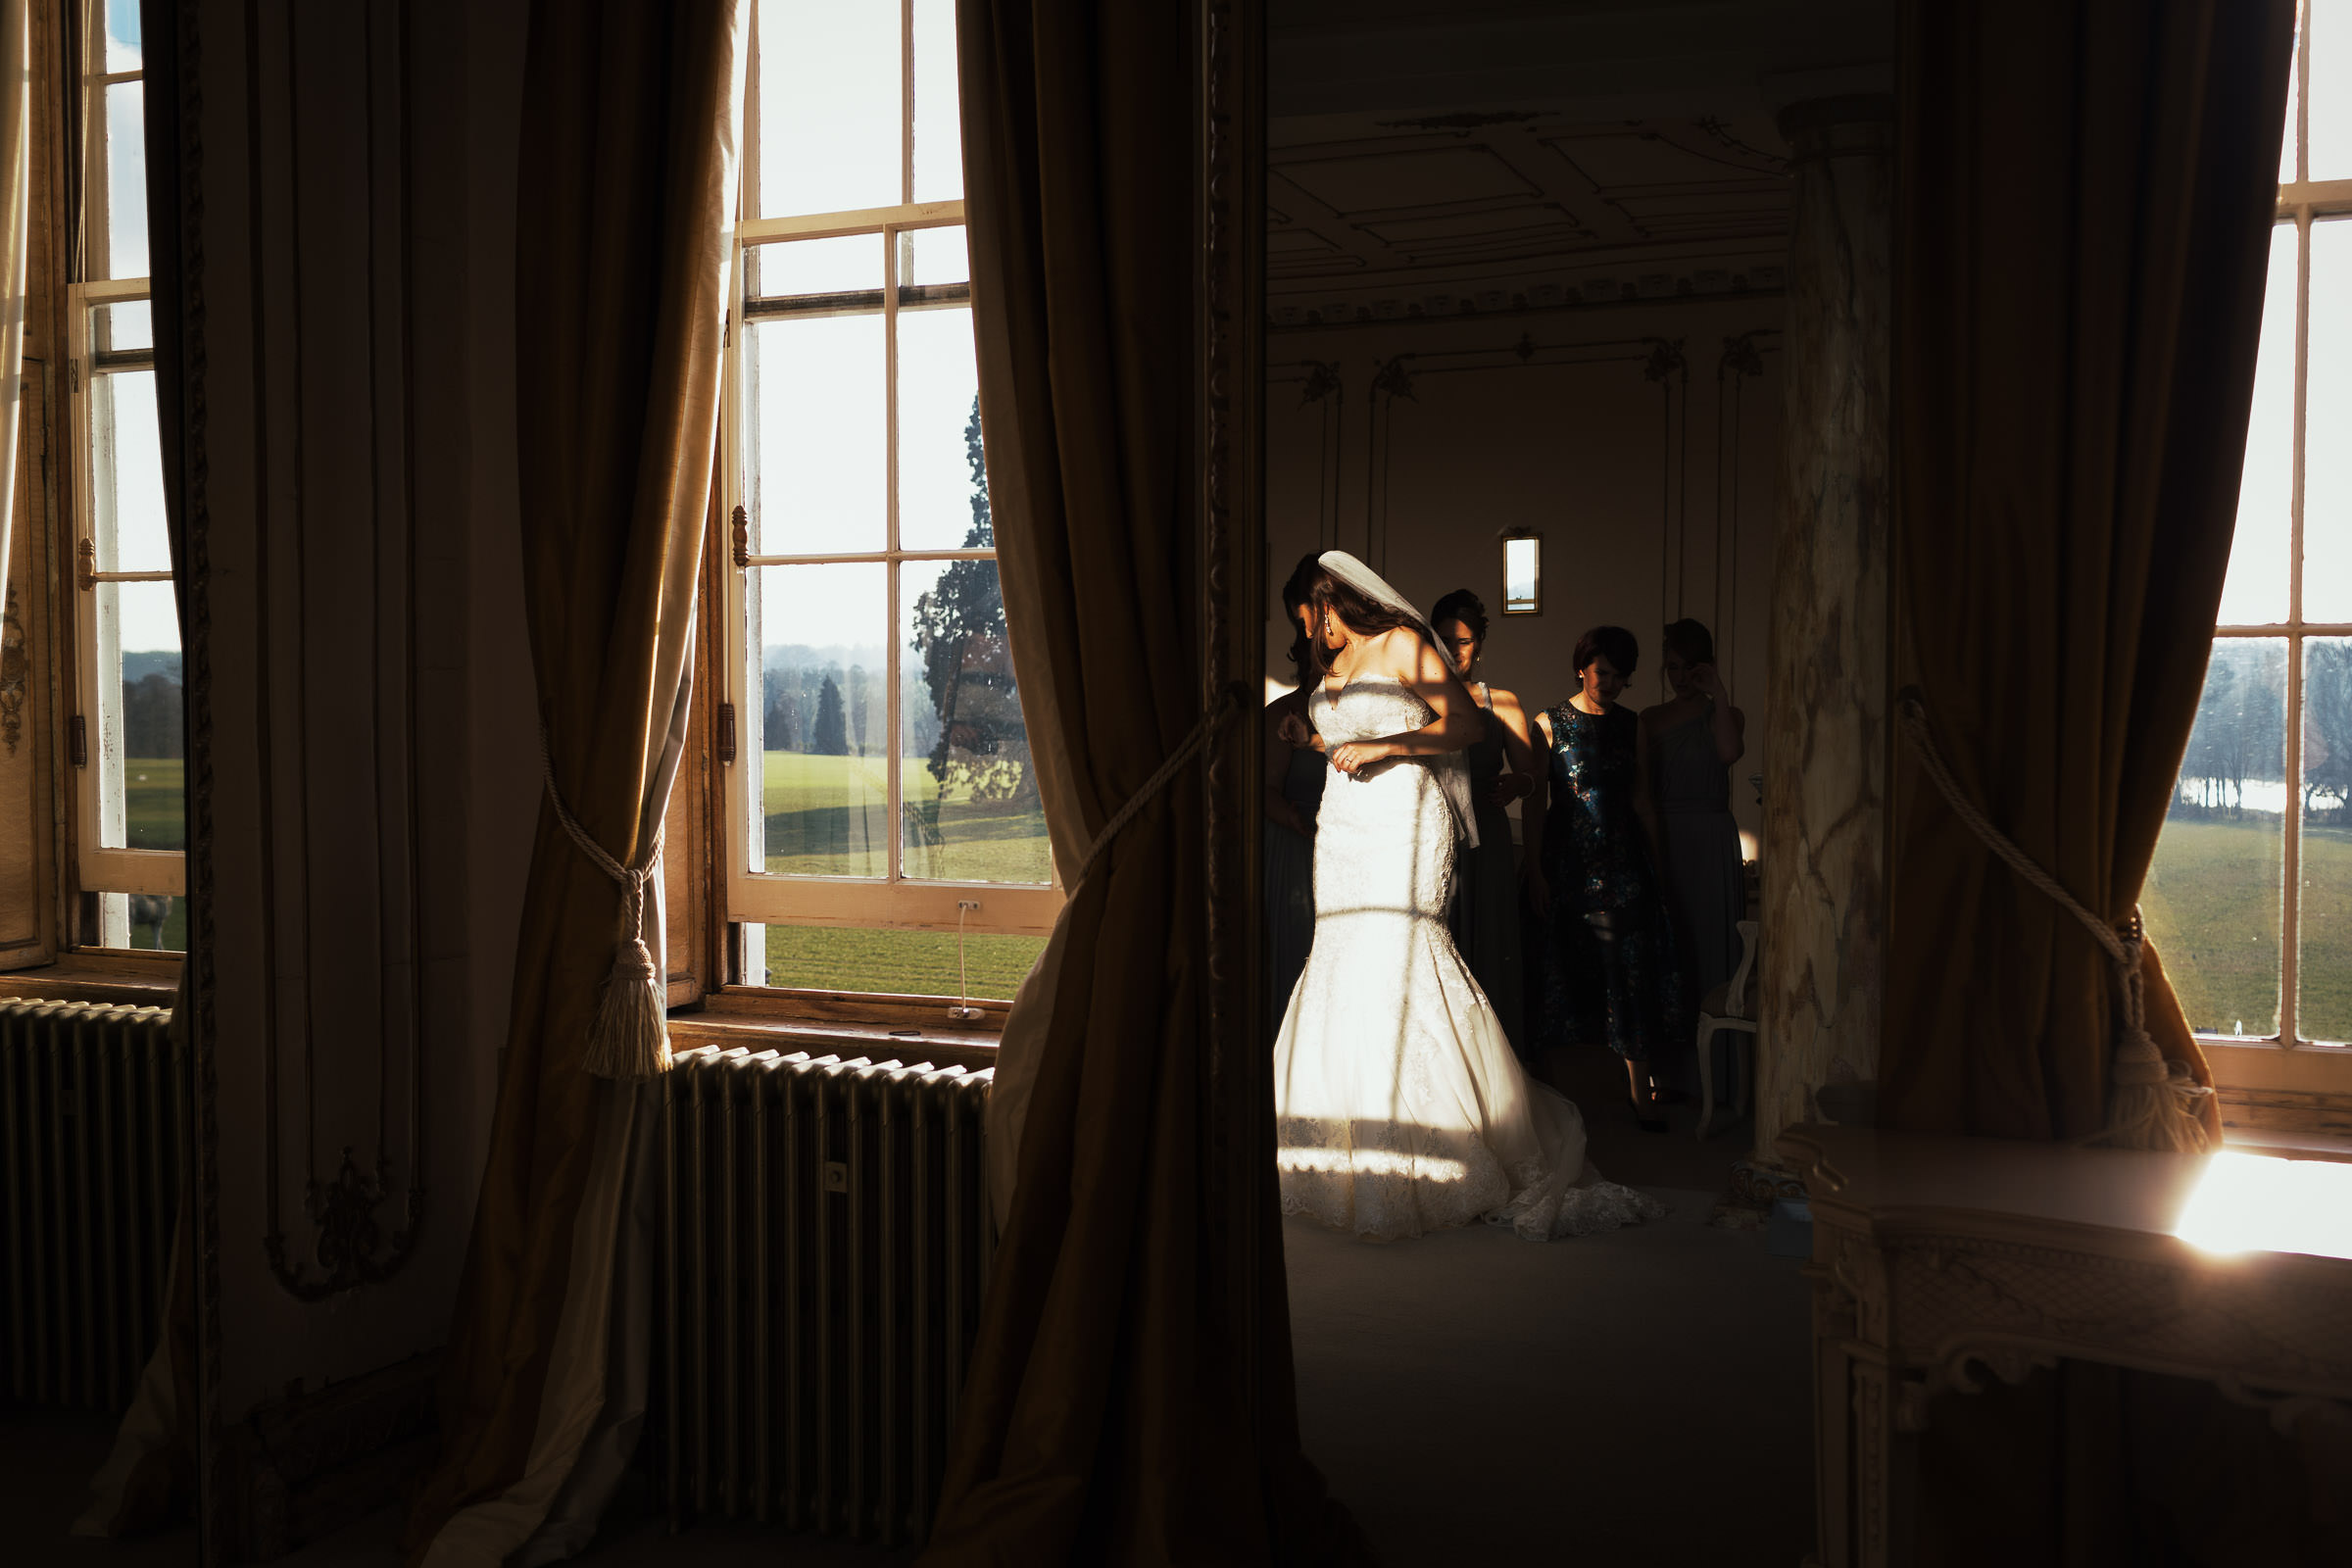 In the bridal suite at Gosfield Hall a bride is getting in her dress with help from her mum and bridesmaids. Her reflection is in the mirror, you can see the grounds outside through the windows. A real wedding moment.